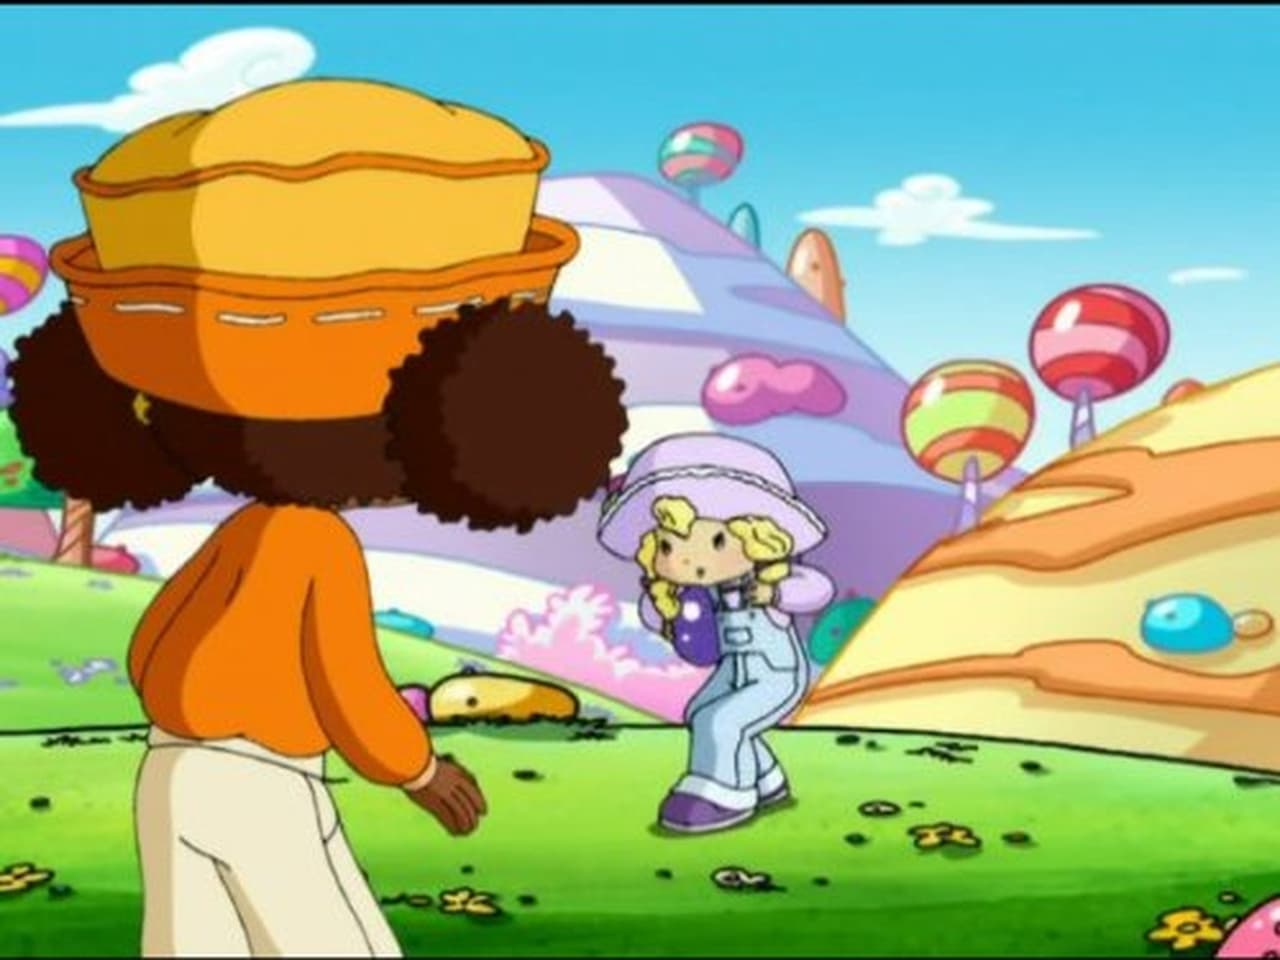 Strawberry Shortcake - Season 2 Episode 5 : Angel Cake in the Outfield